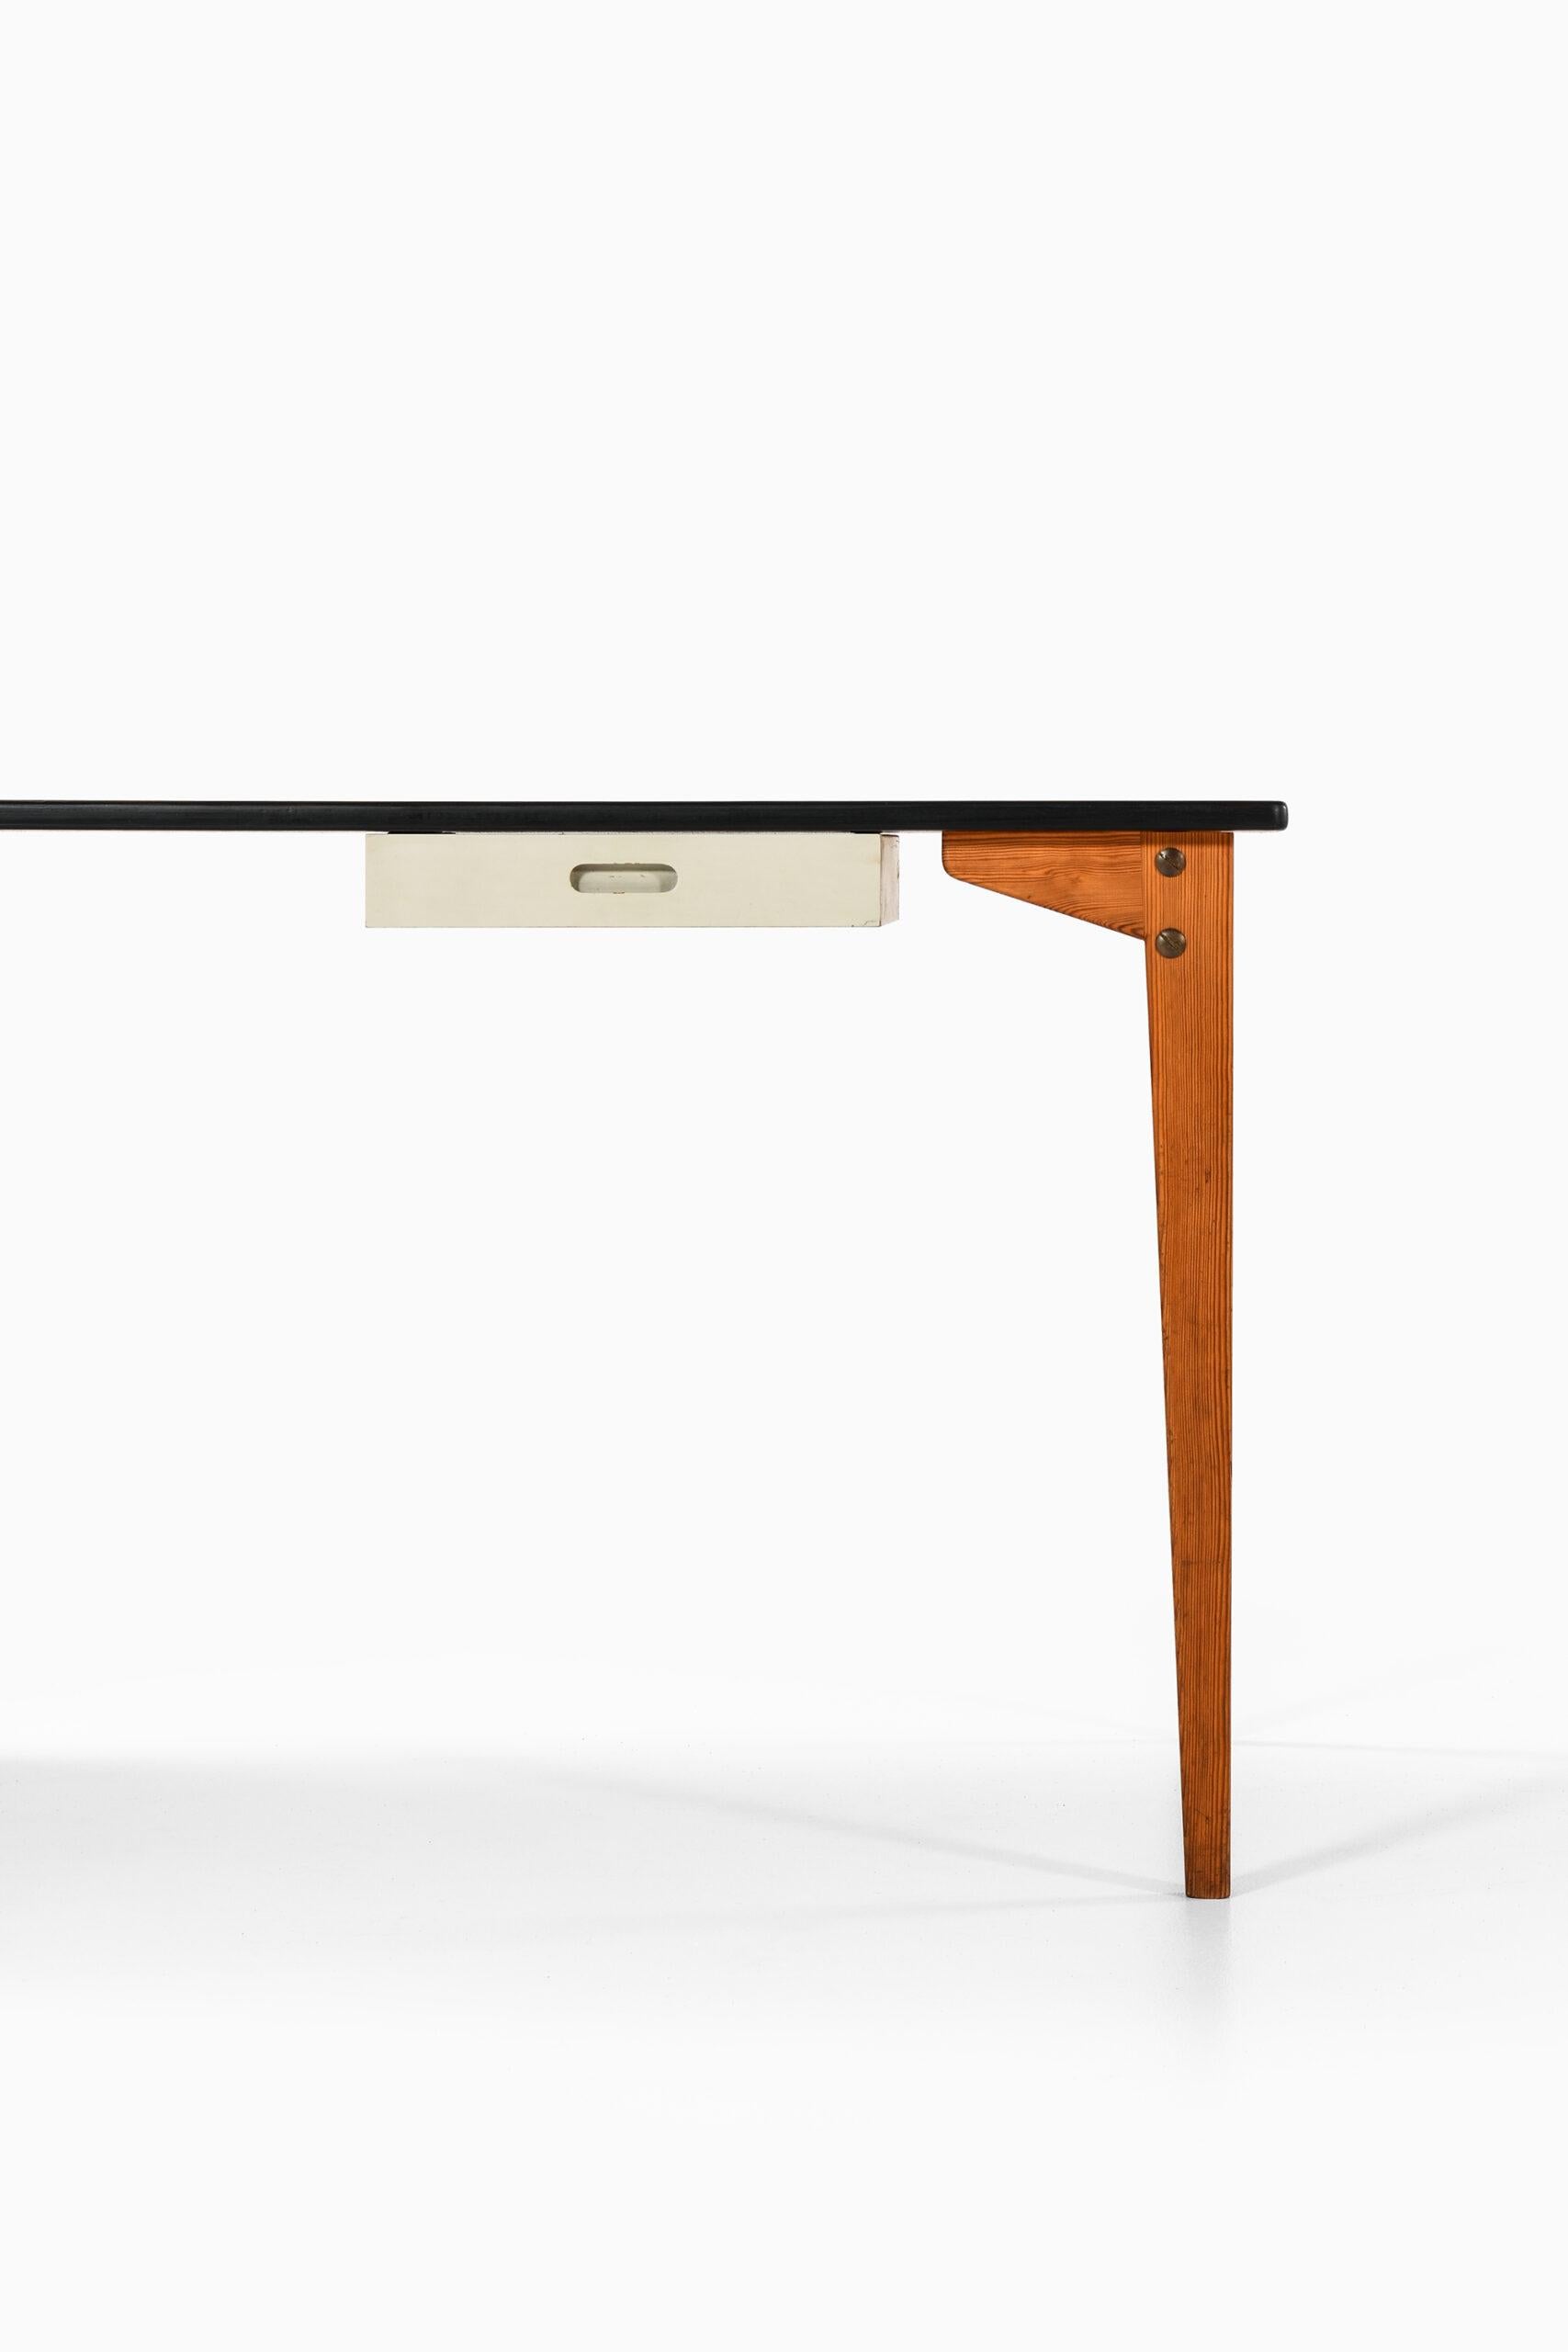 Rare freestanding desk by unknown designer. Probably produced in Sweden.
Width: 132.5 ( 197.5 ) cm.